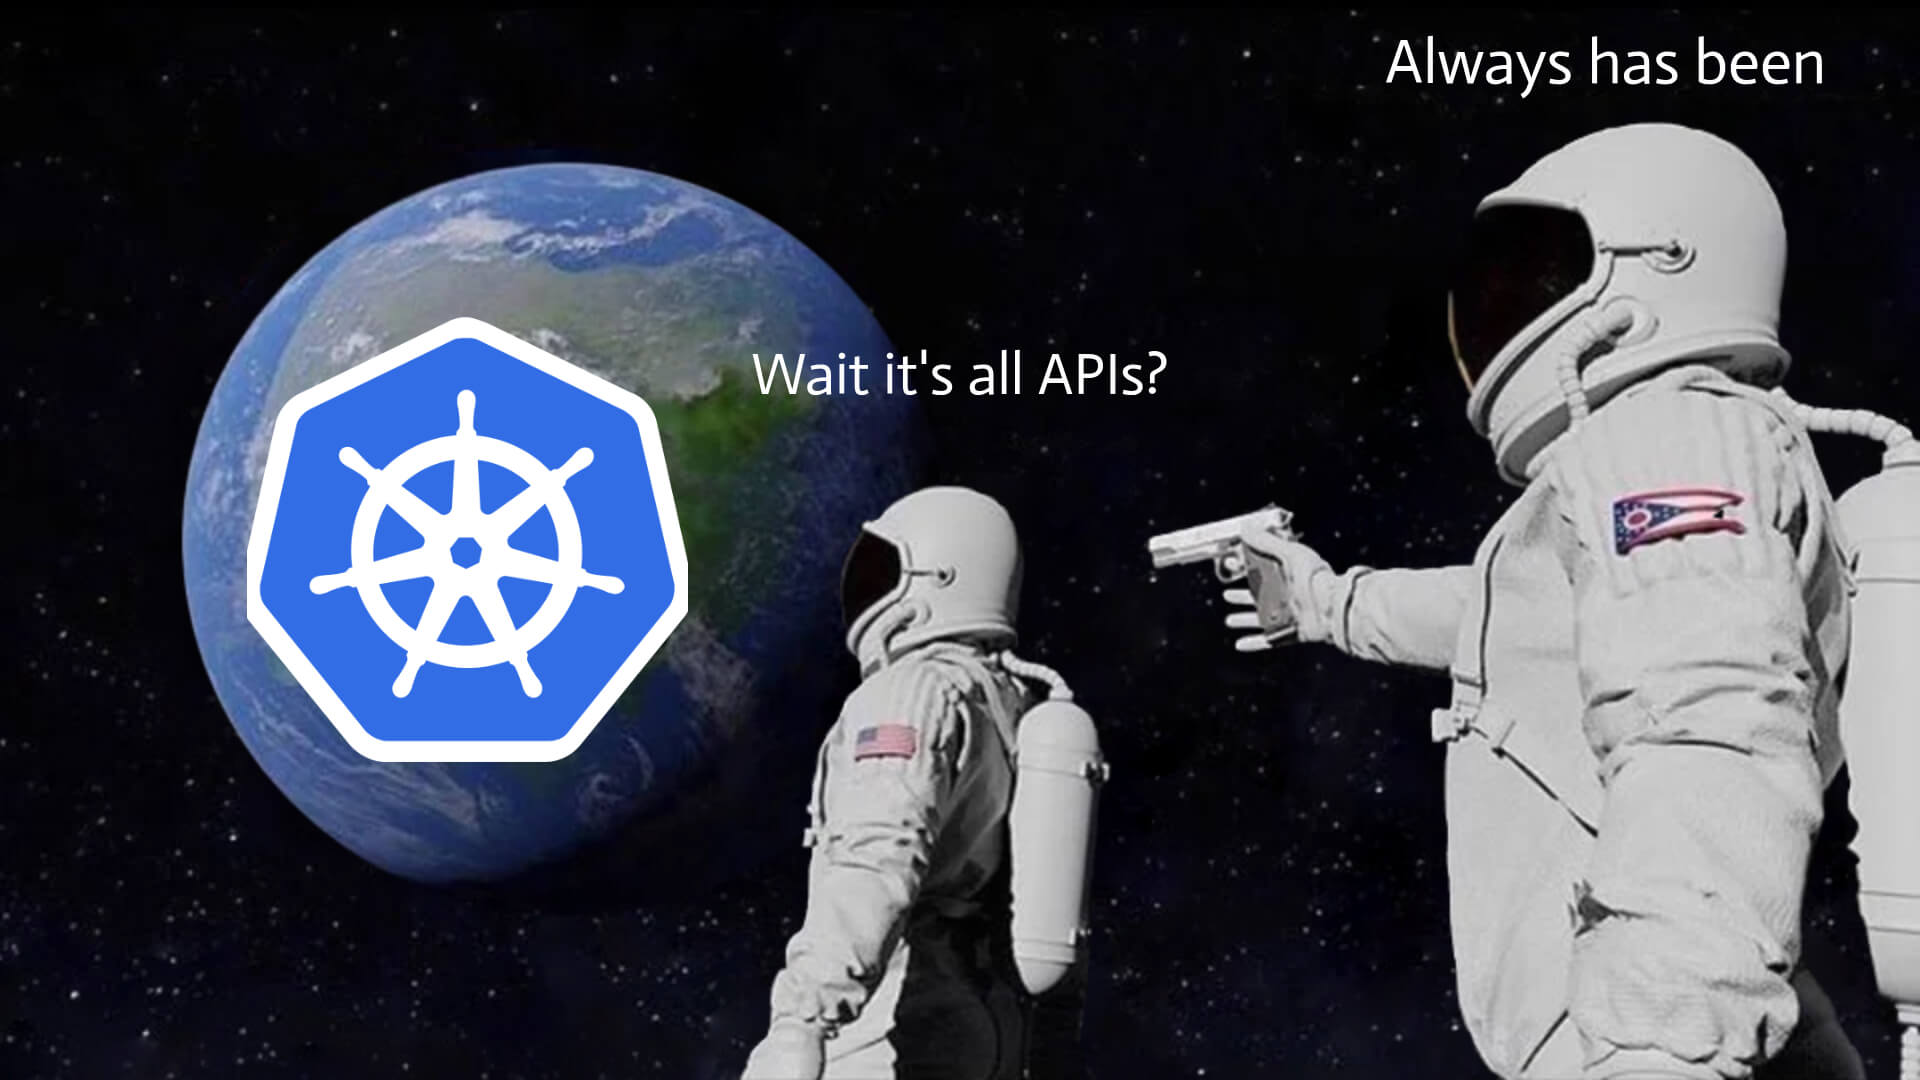 k8s-is-about-apis.jpeg